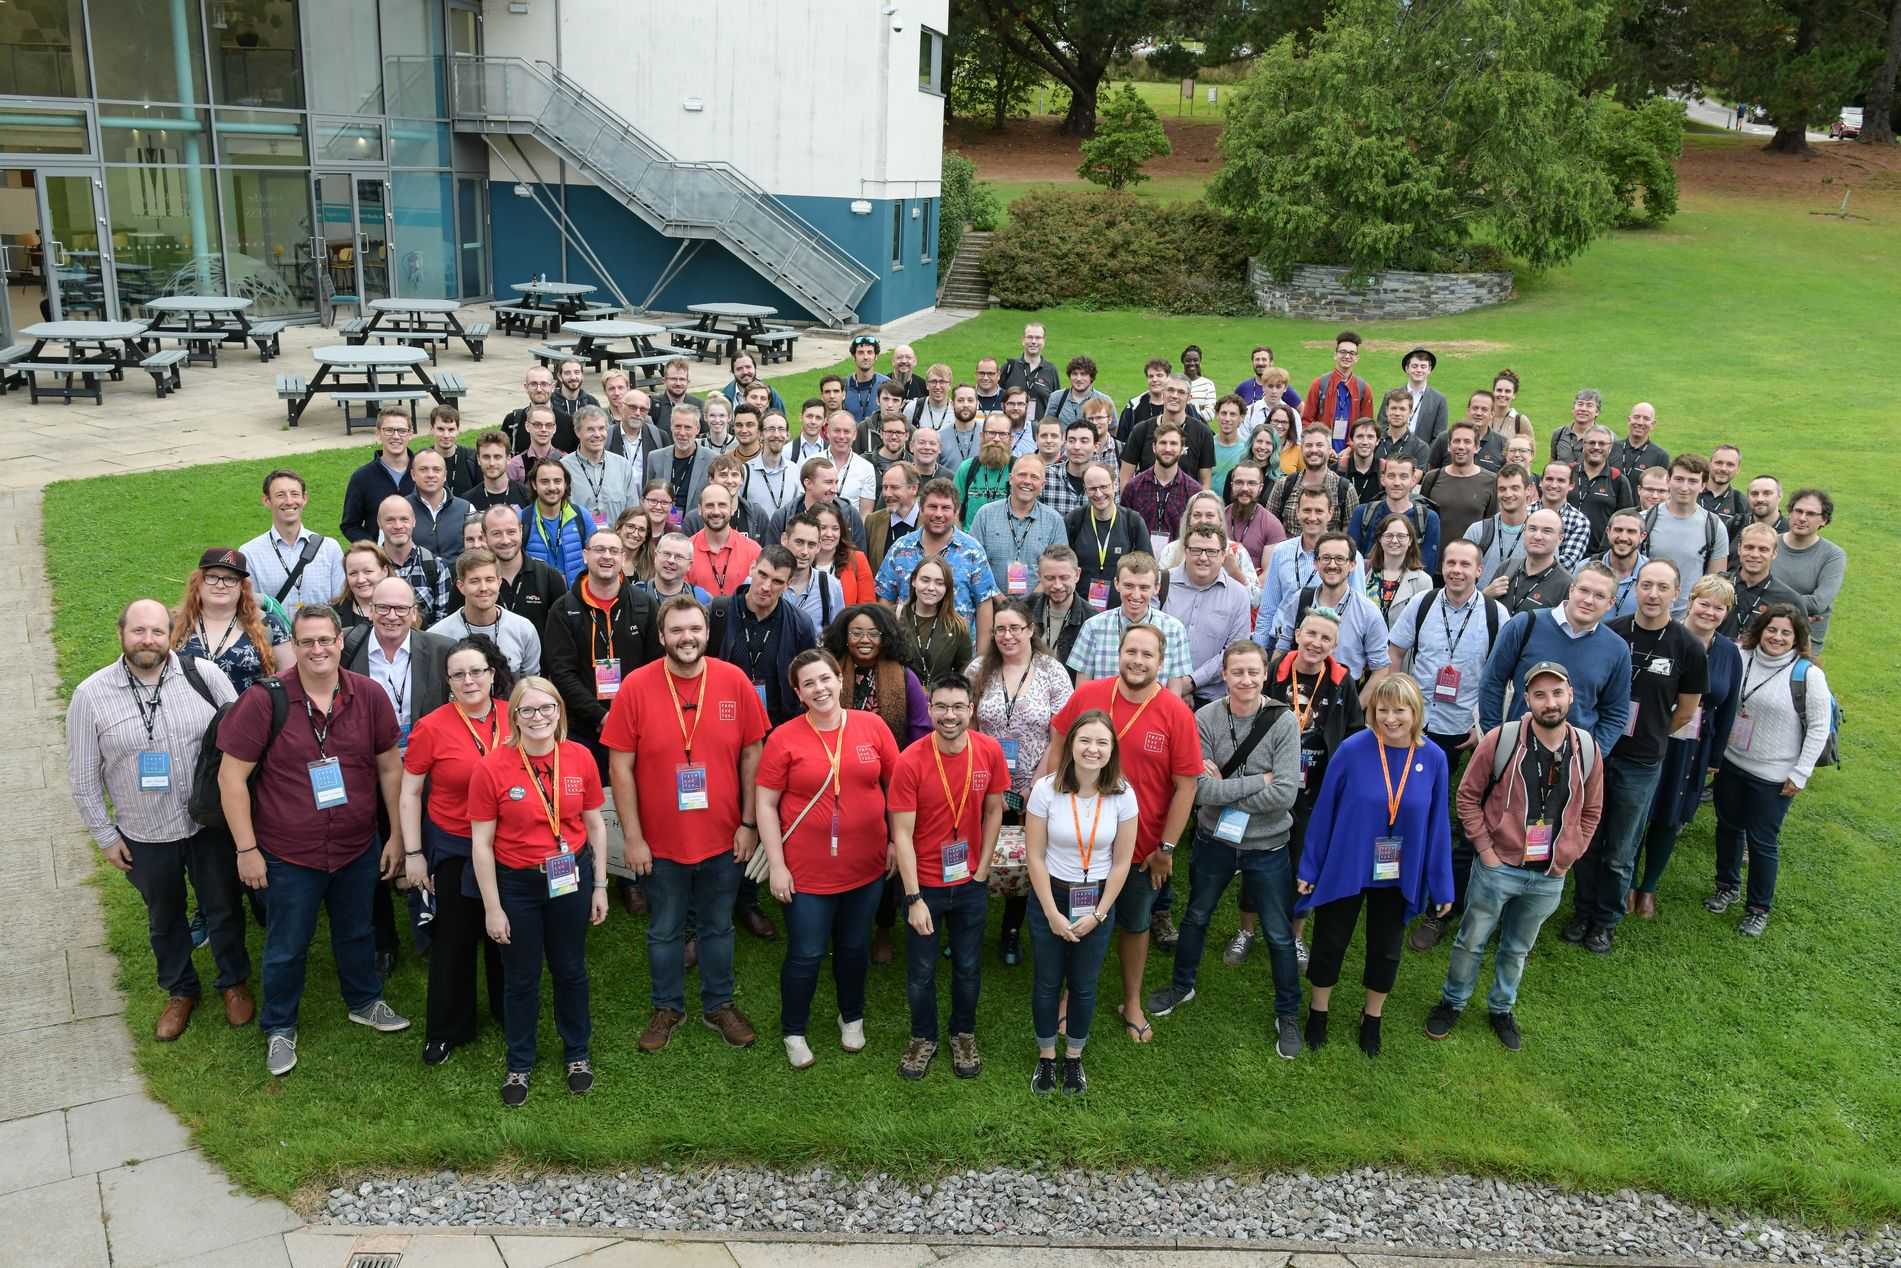 Group shot of the 2019 conference attendees with the conference team in the front